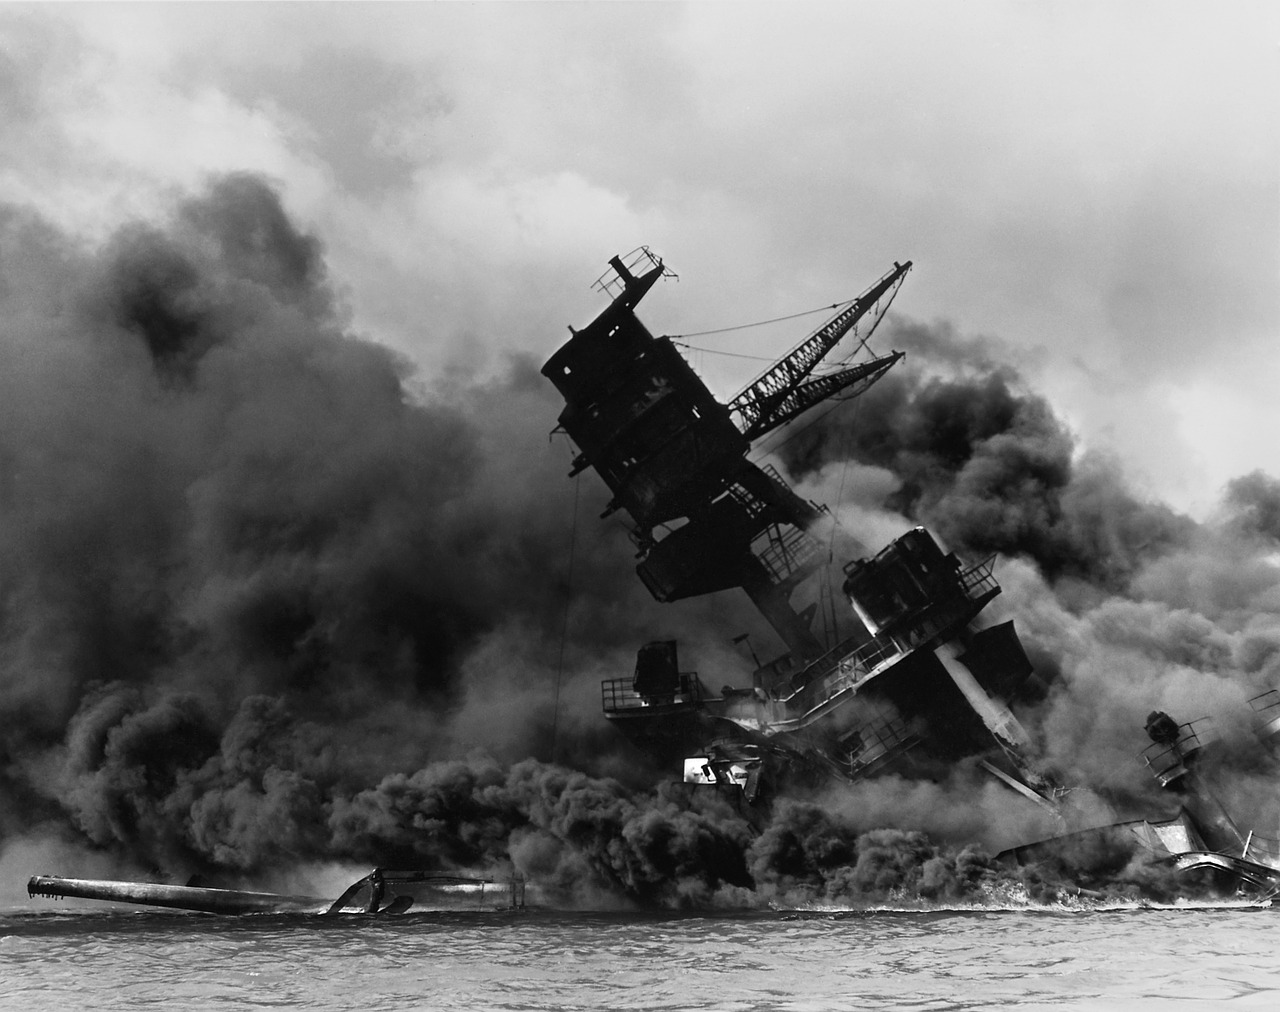 national pearl harbor remembrance day 2021